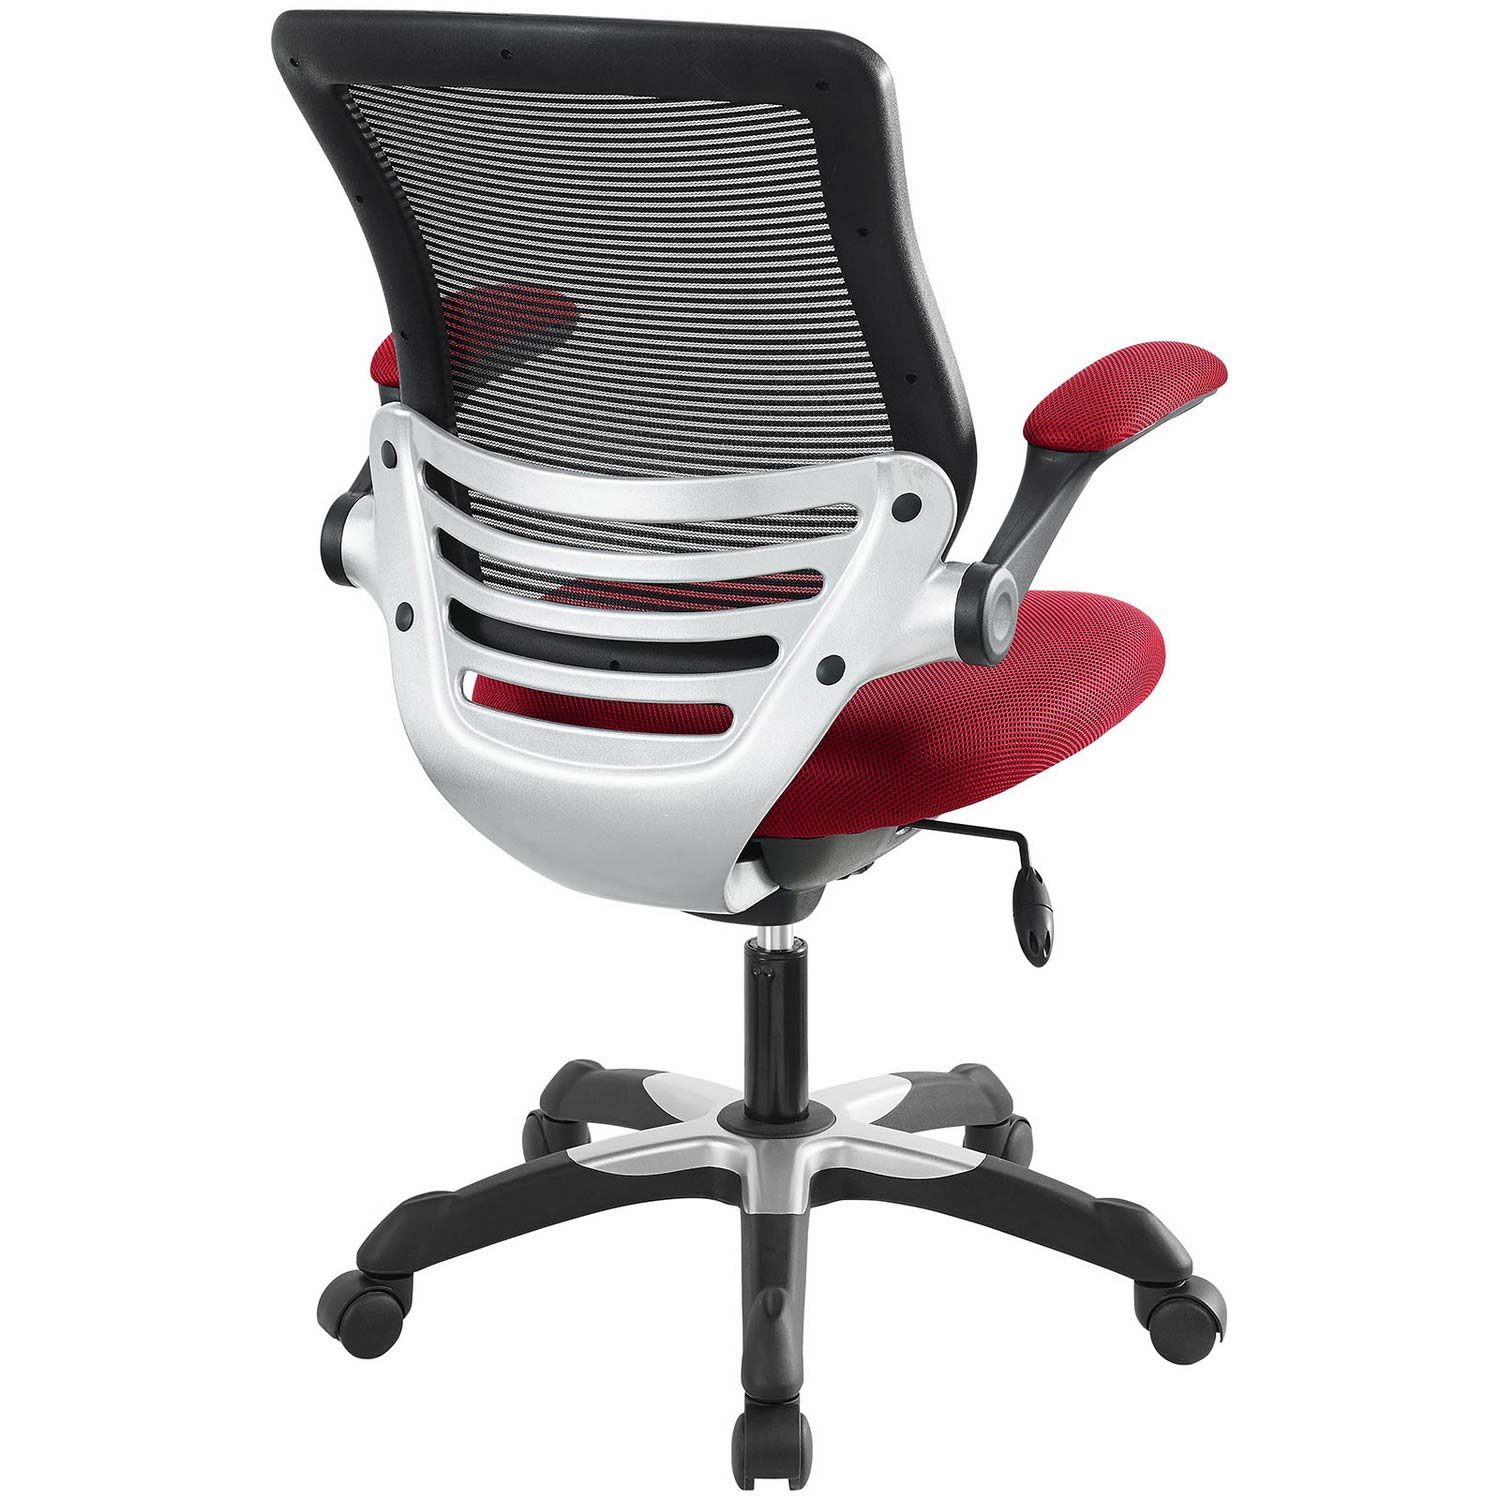 Modway Edge Office Chair - Red